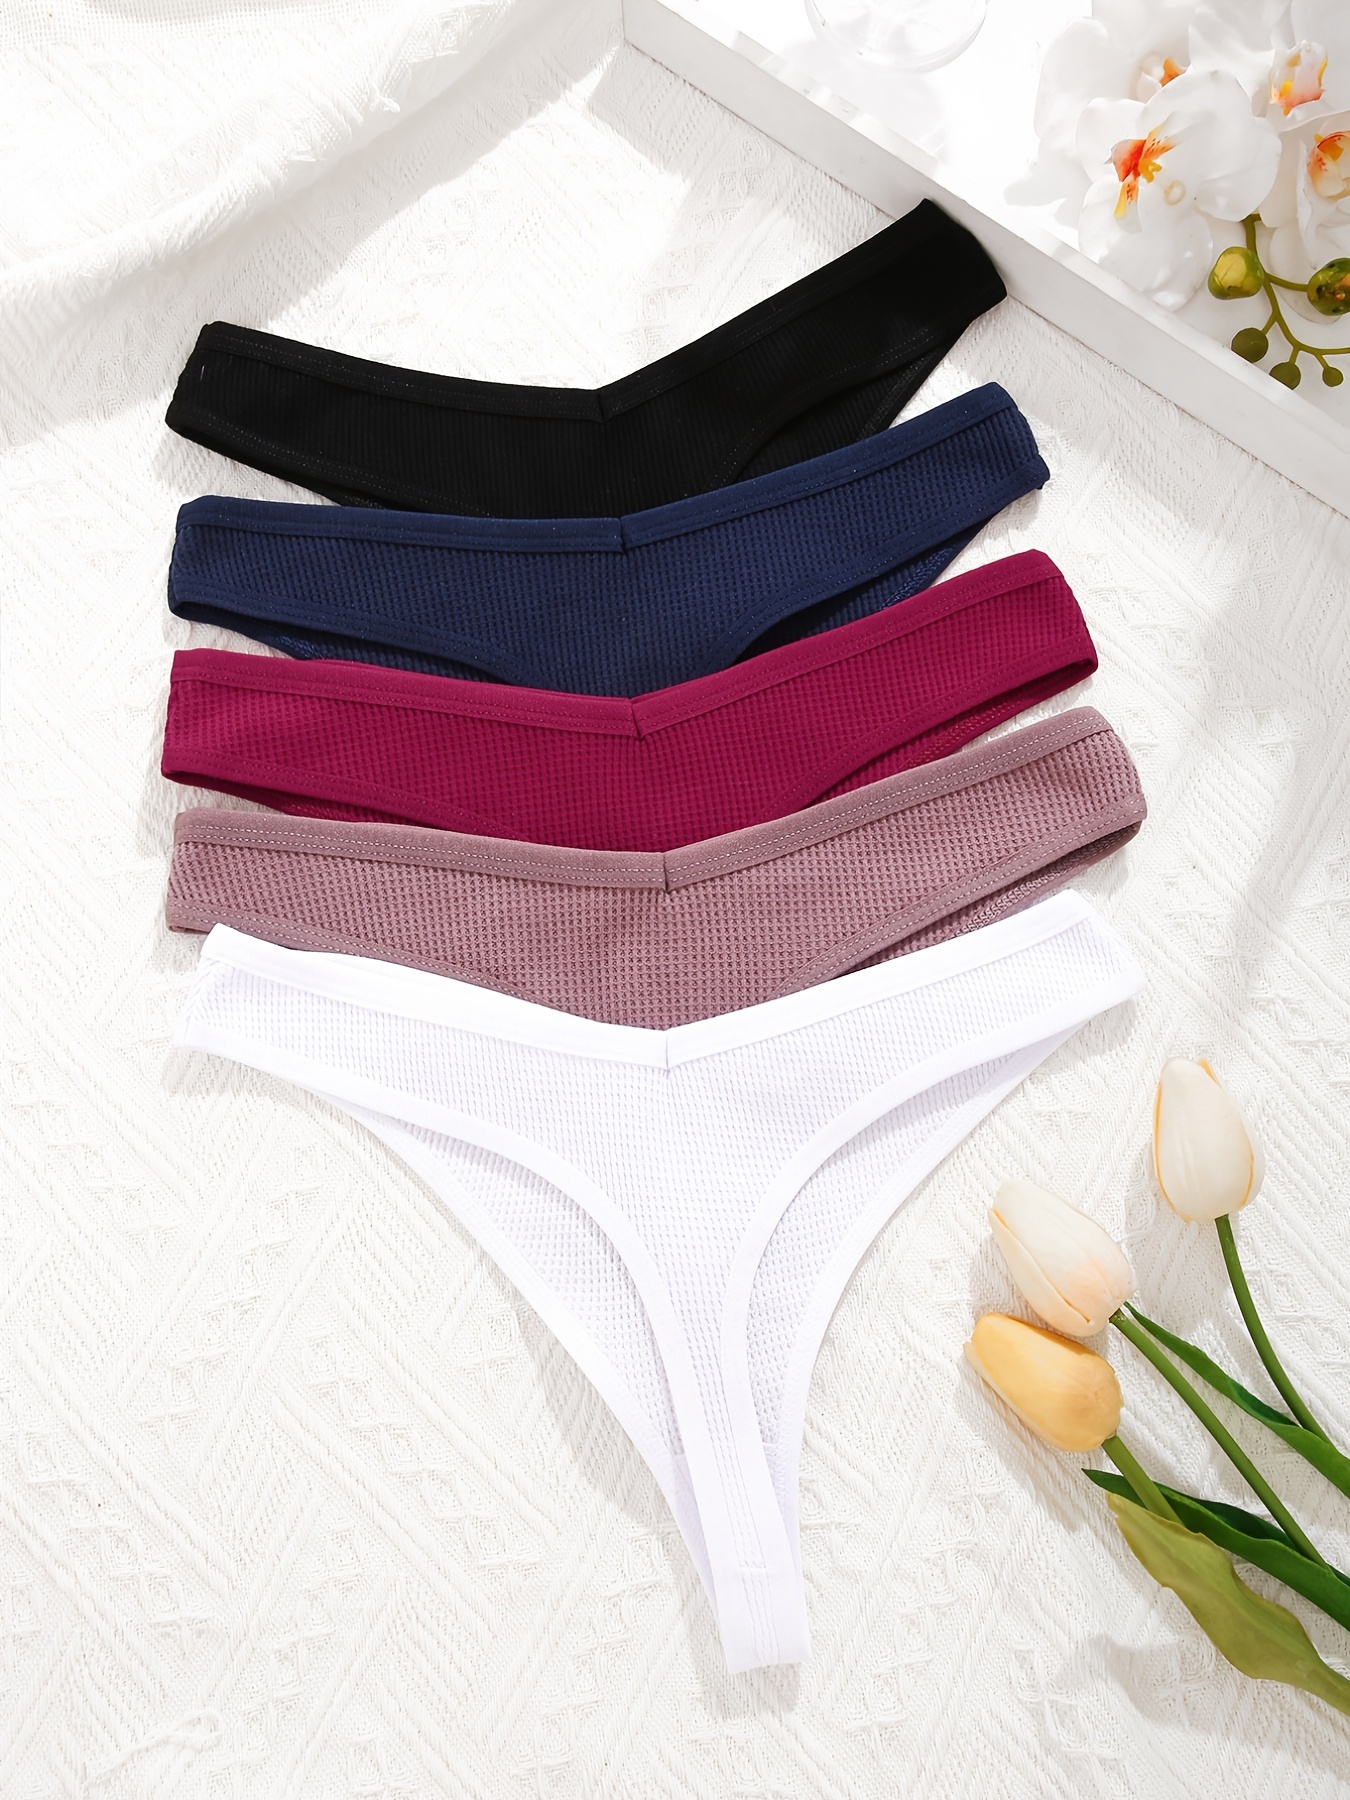 FINETOO 10 Pack Thongs for Women Cotton Underwear Breathable Stretch Low  Rise Hipster Panties Sexy S-XL : : Clothing, Shoes & Accessories